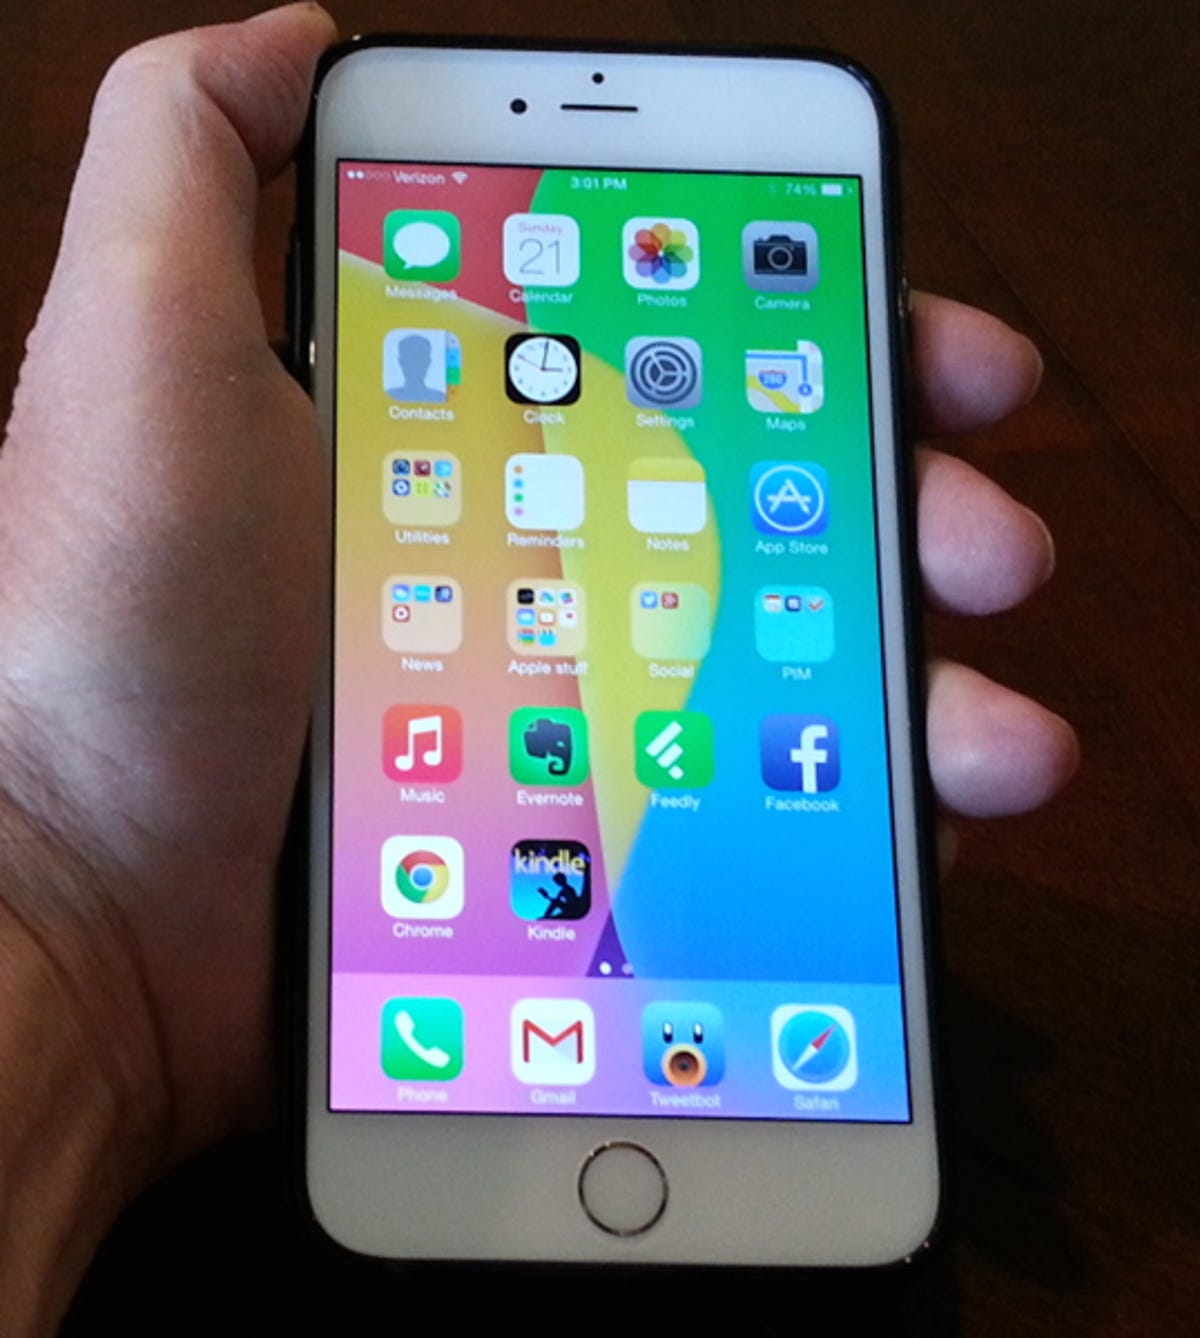 05-iphone-6-plus-sized-in-hand.jpg